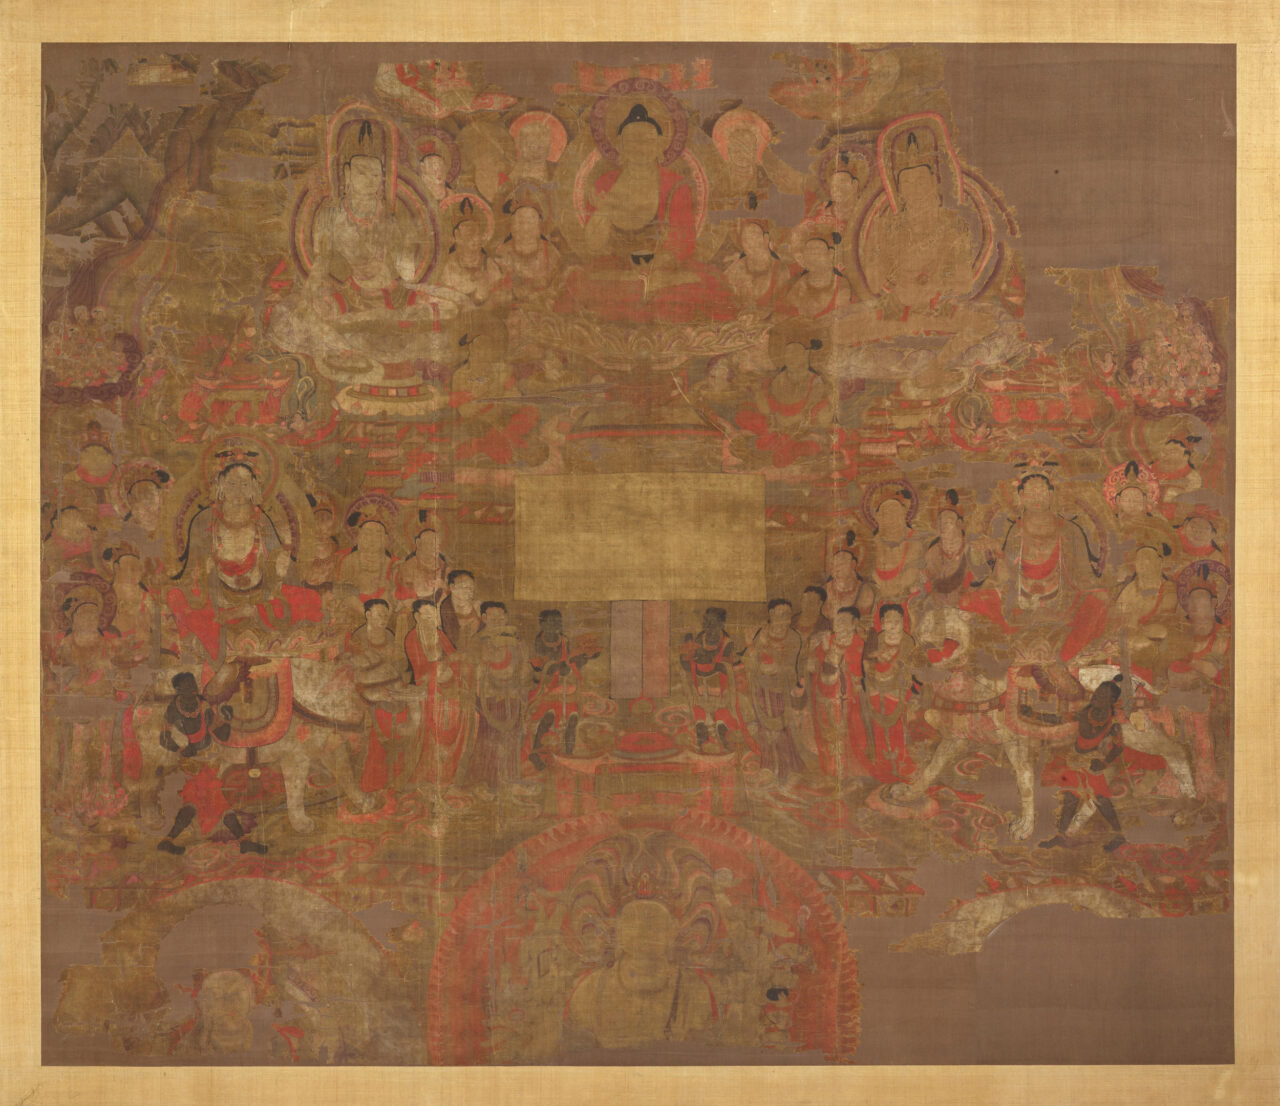 Buddha, two bodhisattvas, and attendants hover above terraced landscape and crowds of people; painted in oranges, reds, and yellows